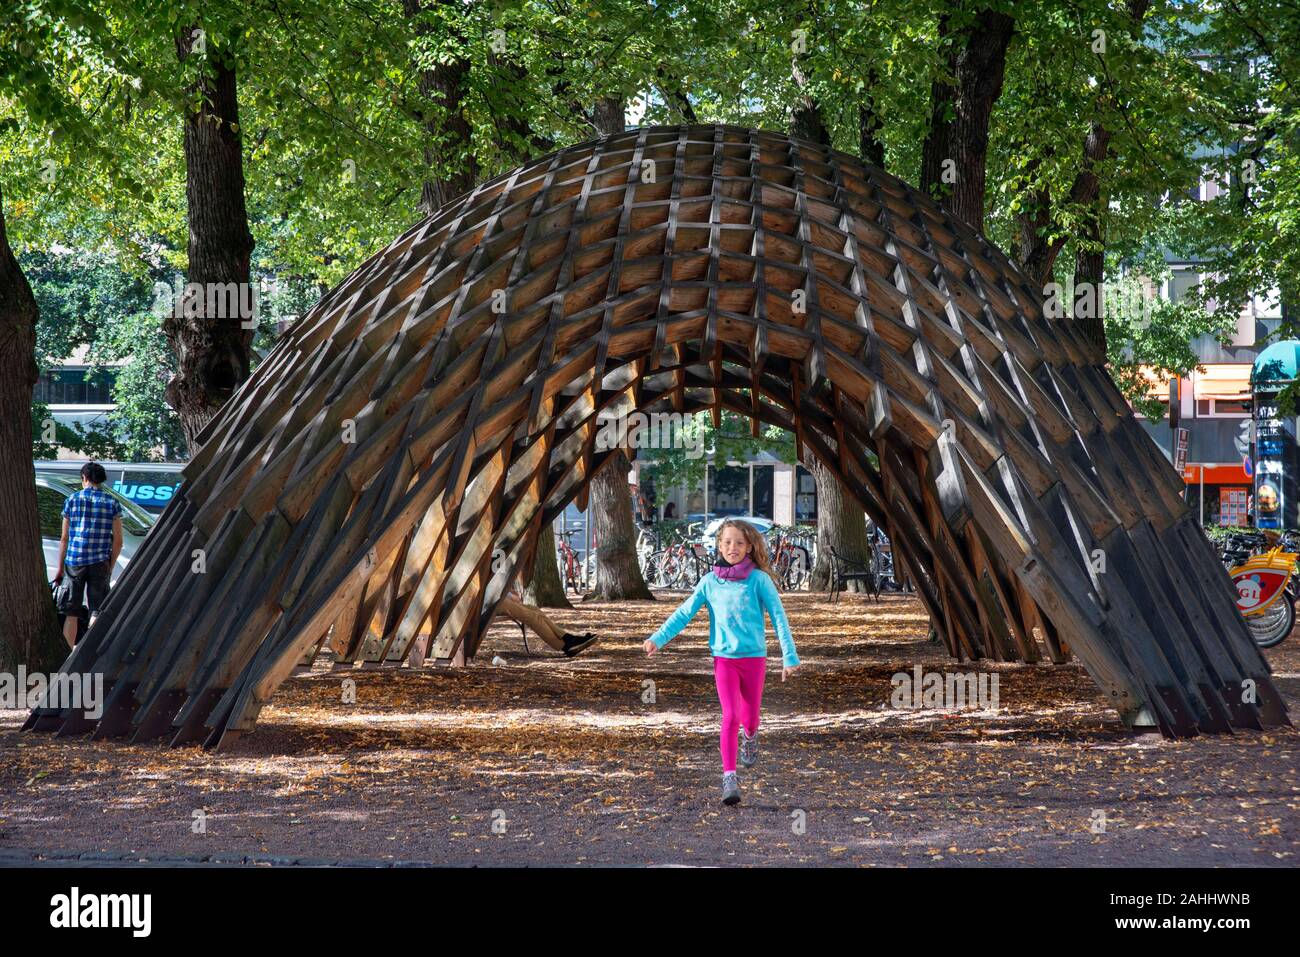 Wood structure of Venice Biennale 2012: New Forms in Wood display now at the city Hall Park at Turku.  European capital of culture 2011 was held at 19 Stock Photo